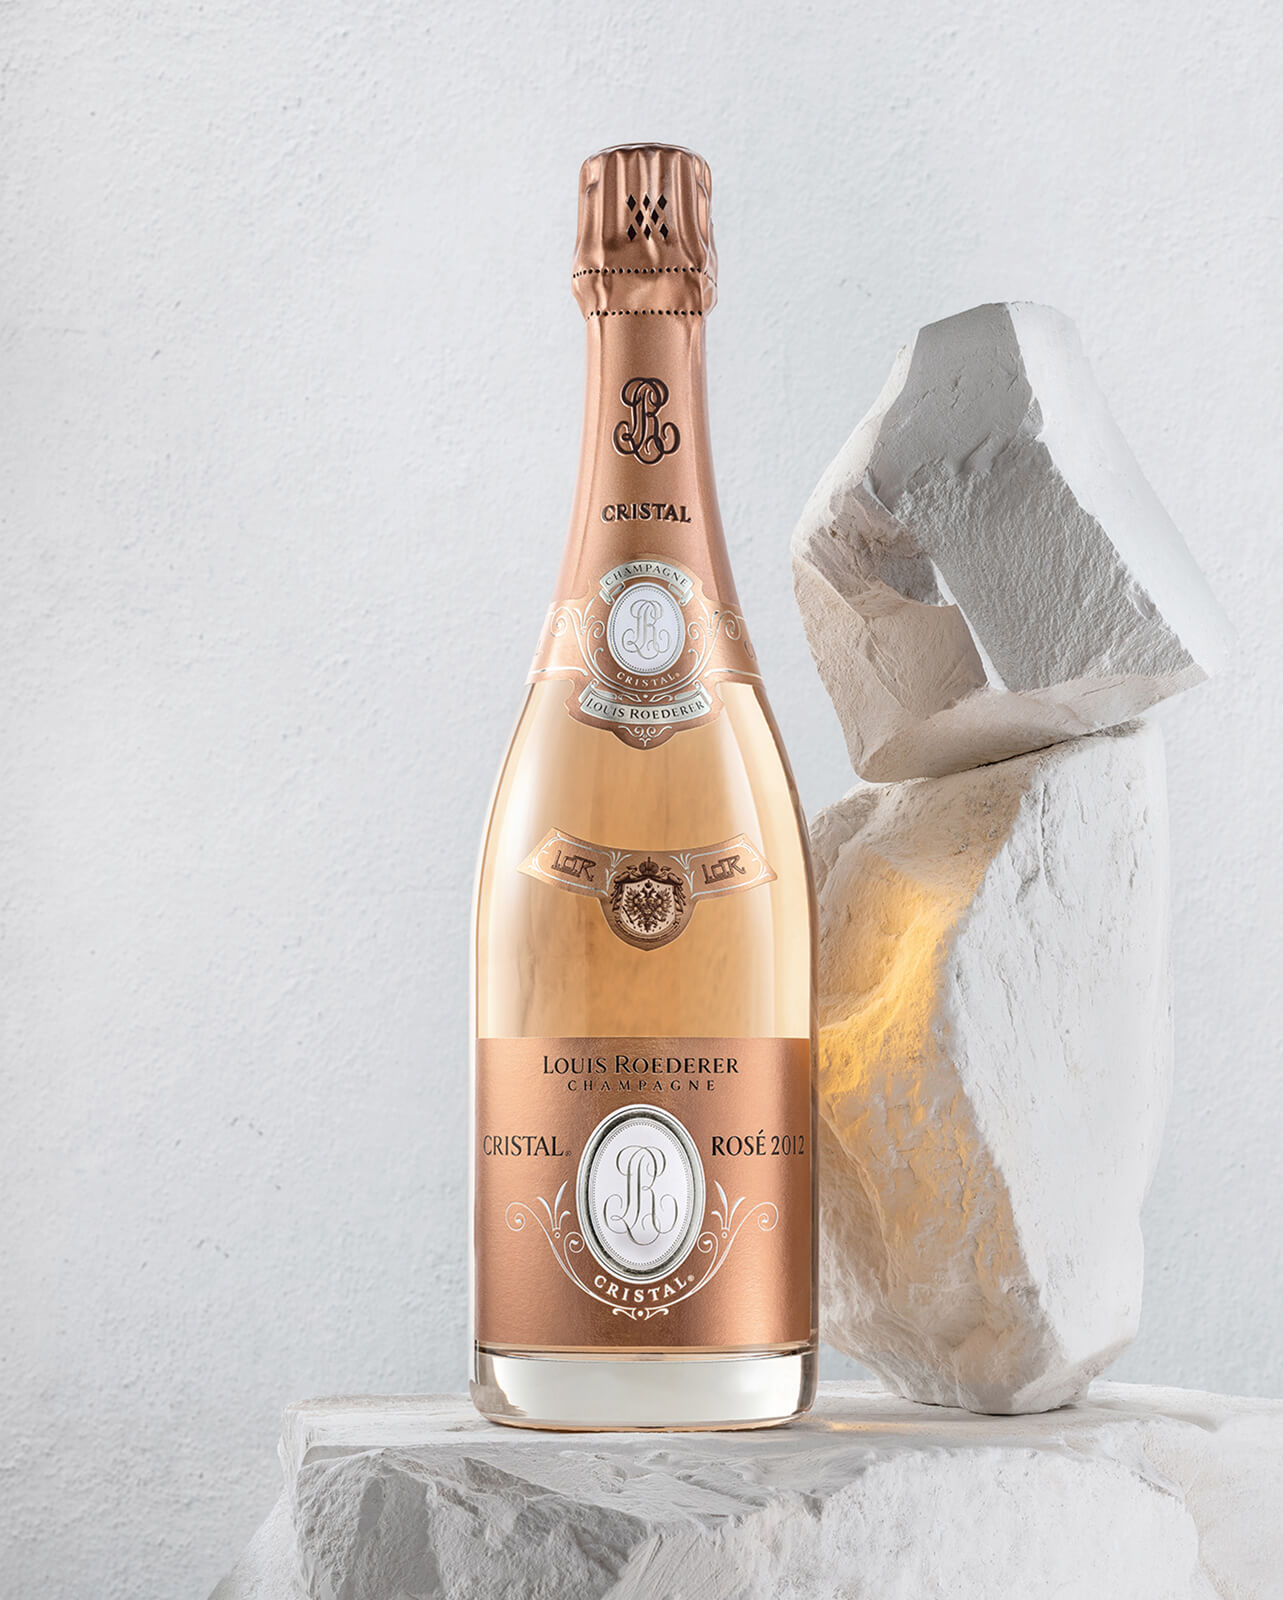 Louis Roederer Cristal 2013 And Cristal Rosé 2012: As Good As